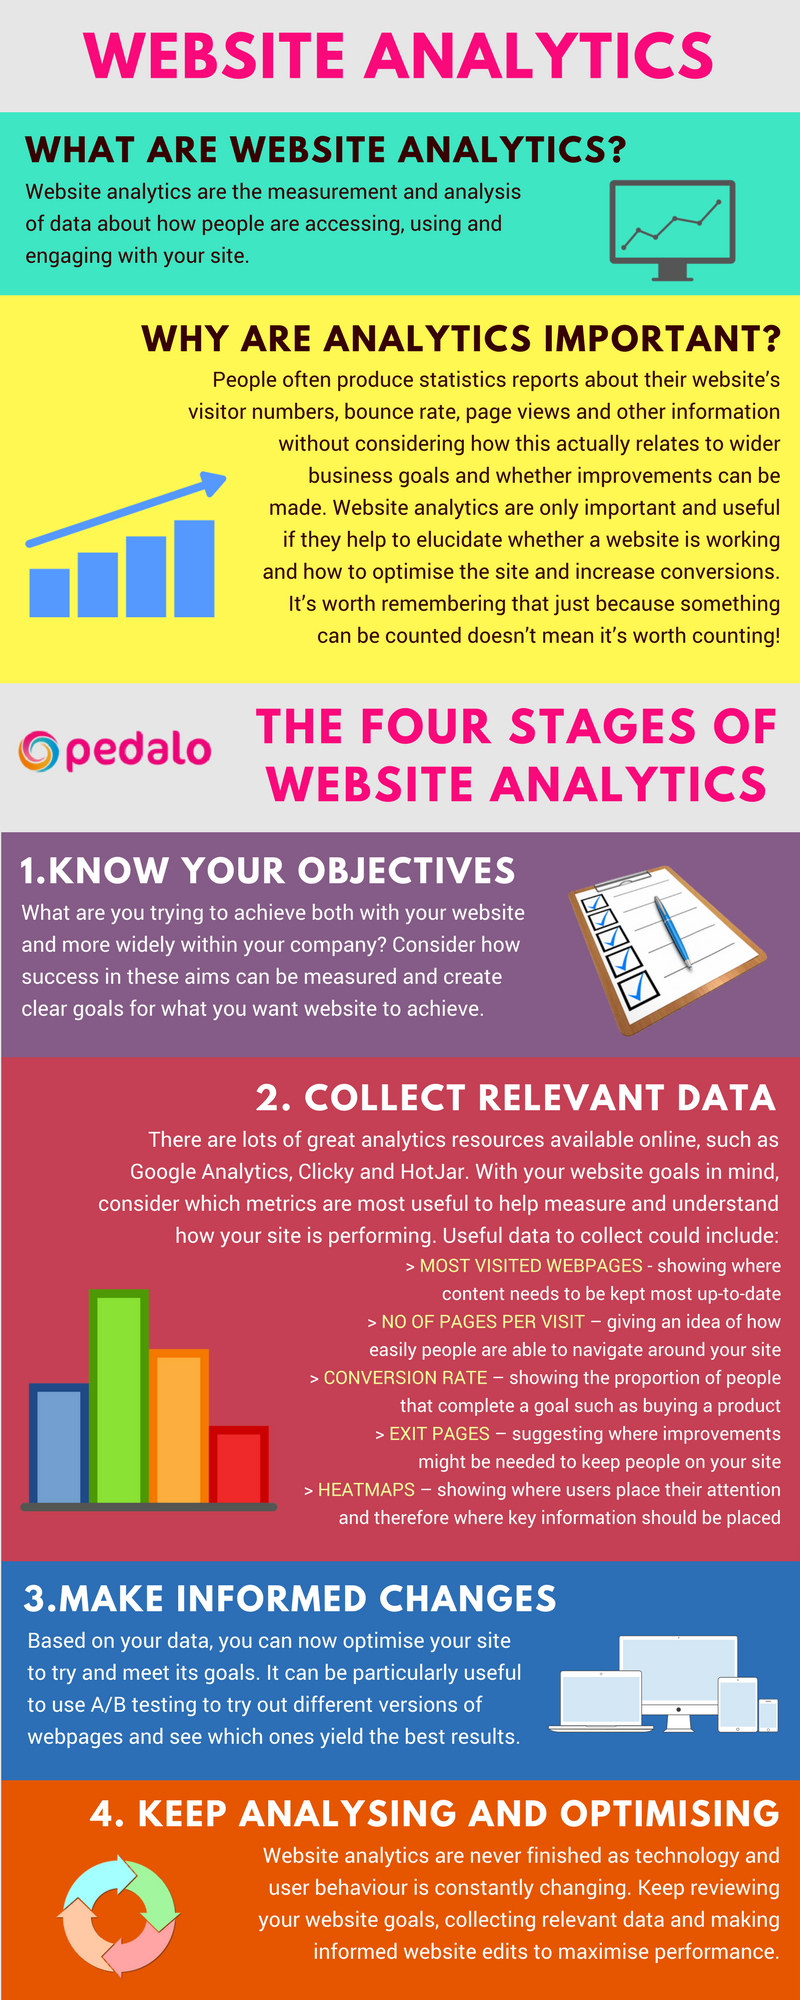 Website analytics infographic by Pedalo